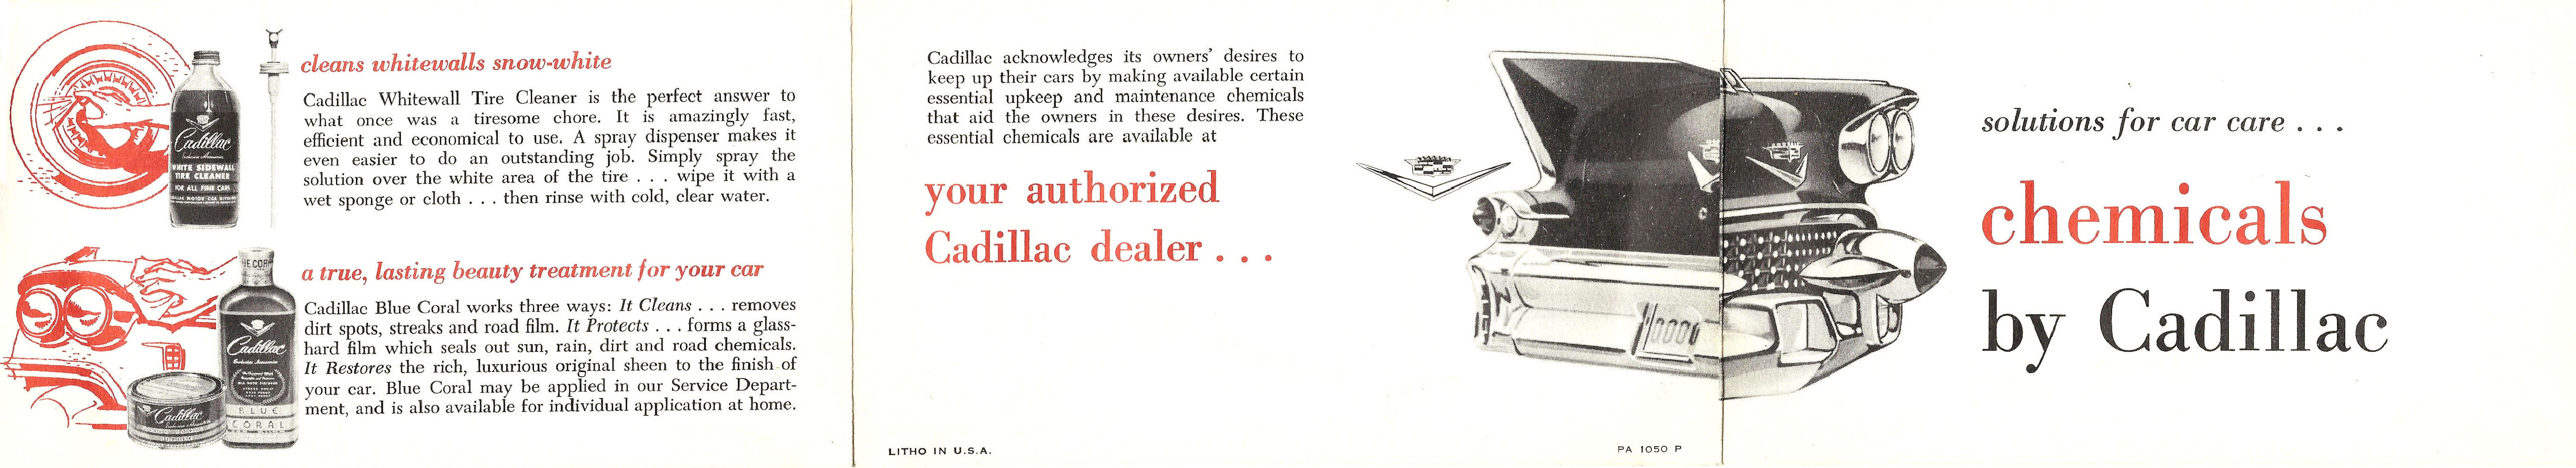 1958_Cadillac_Chemicals-Side_A